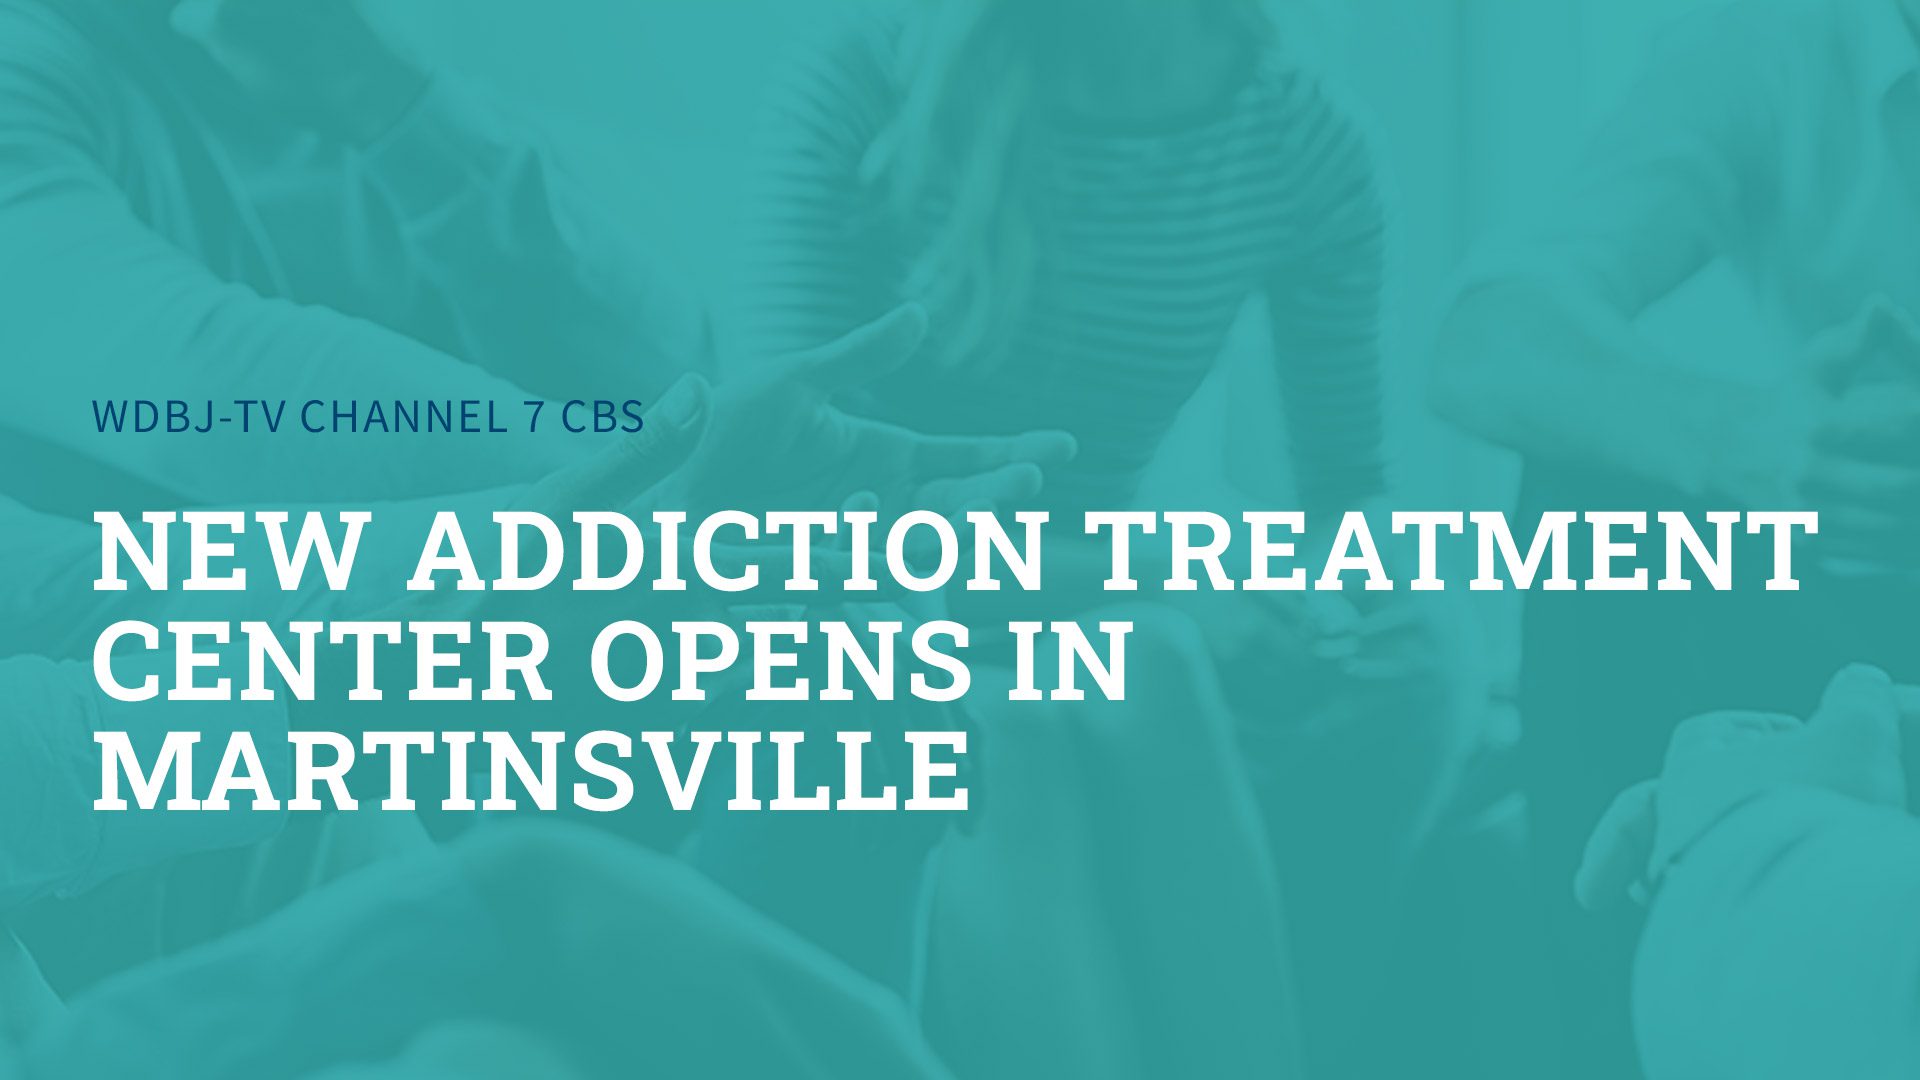 New Addiction Treatment Center Opens in Martinsville